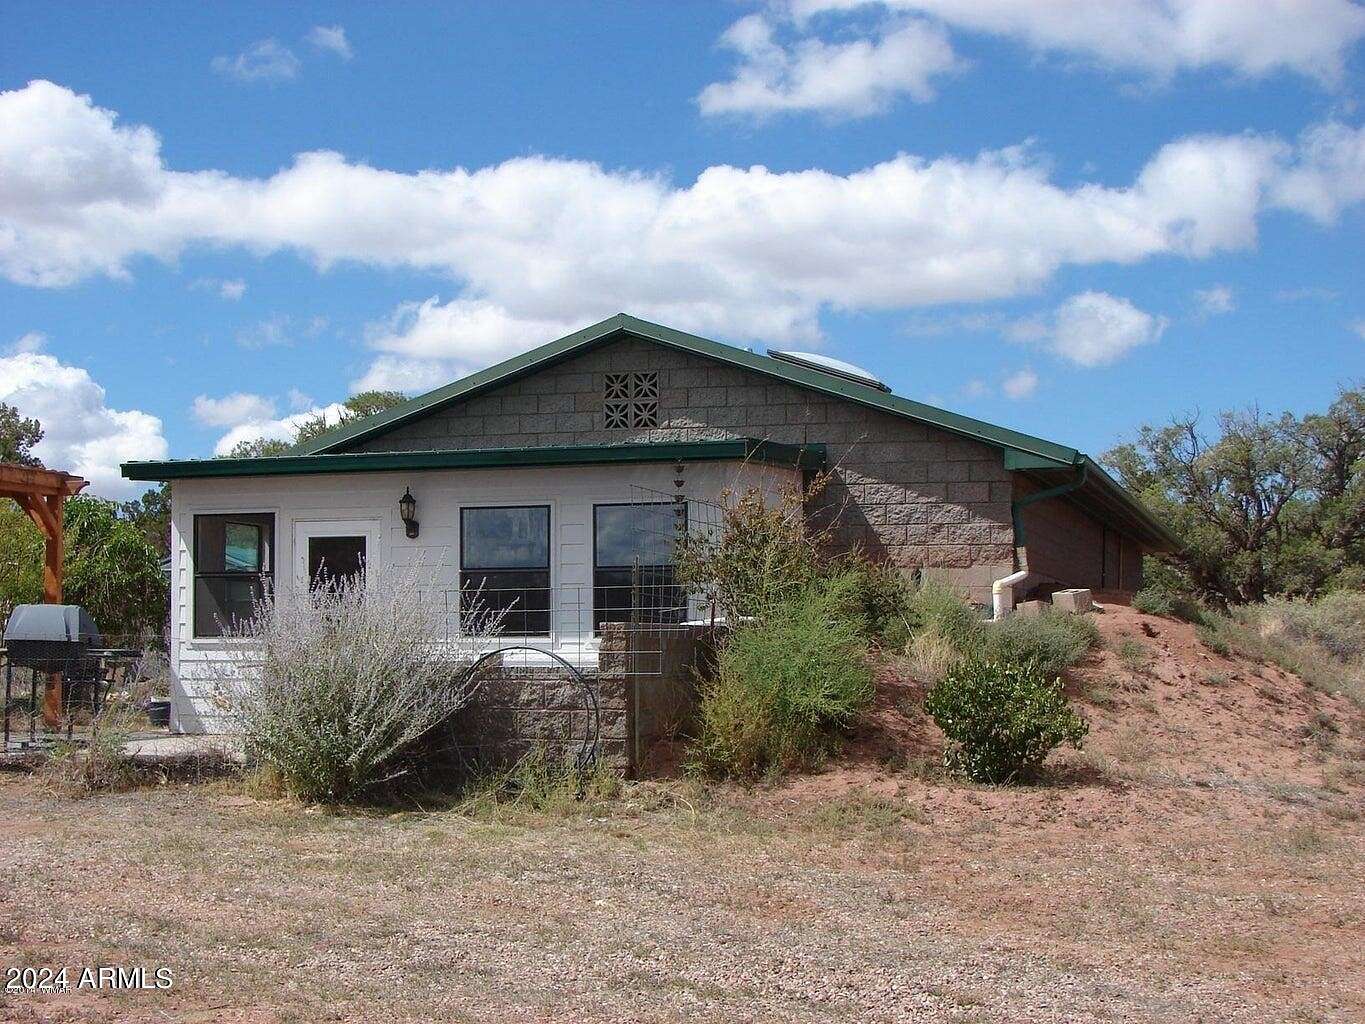 42 Acres of Recreational Land with Home for Sale in Snowflake, Arizona